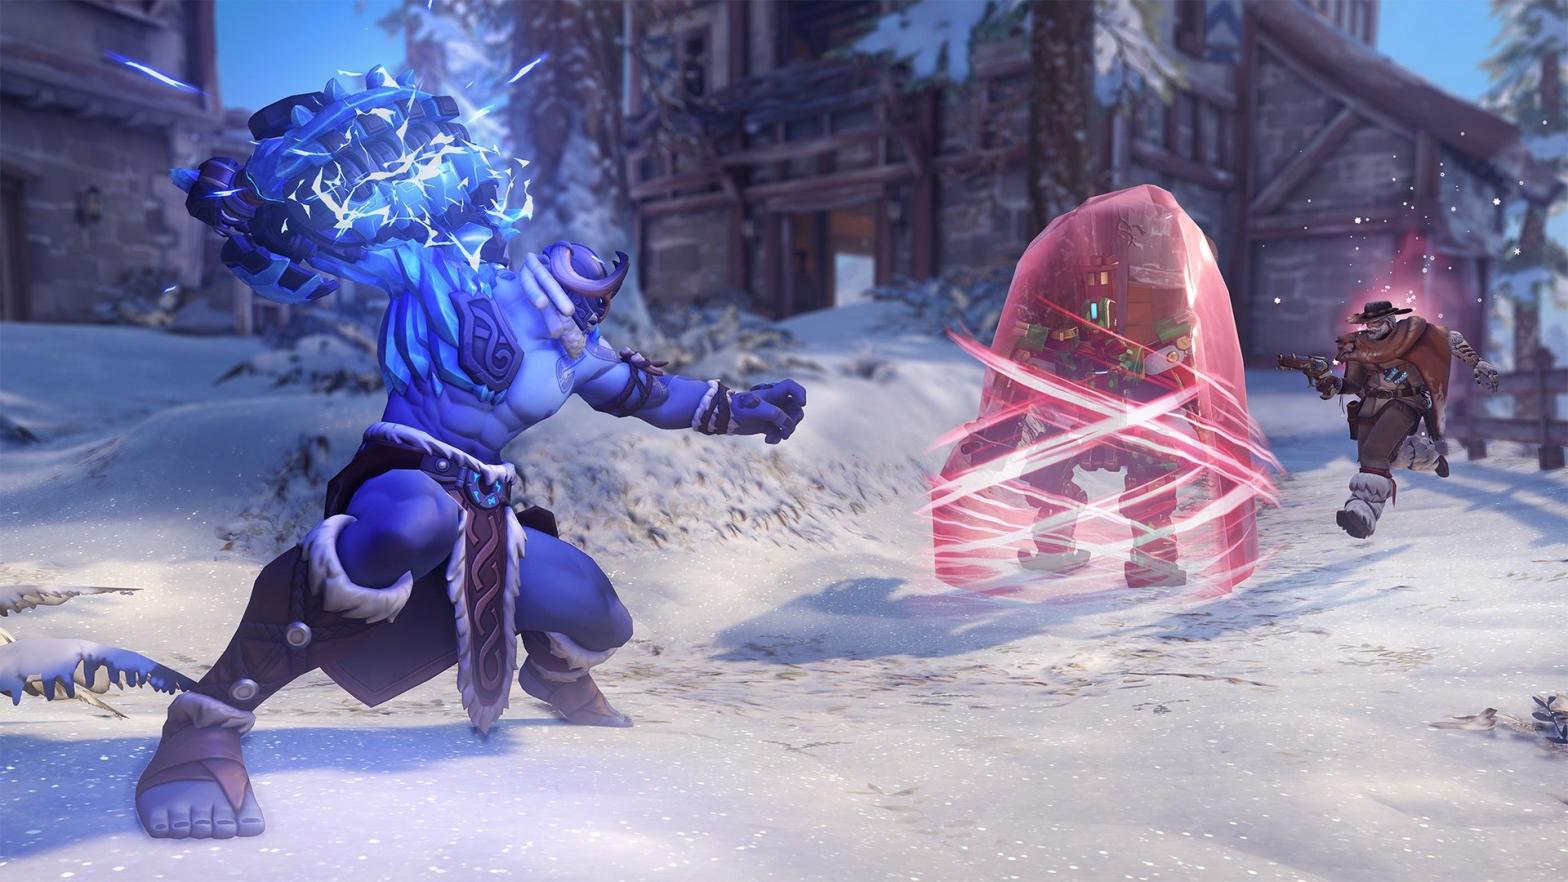 Prepare to be frozen in place once more. (Screenshot: Blizzard)